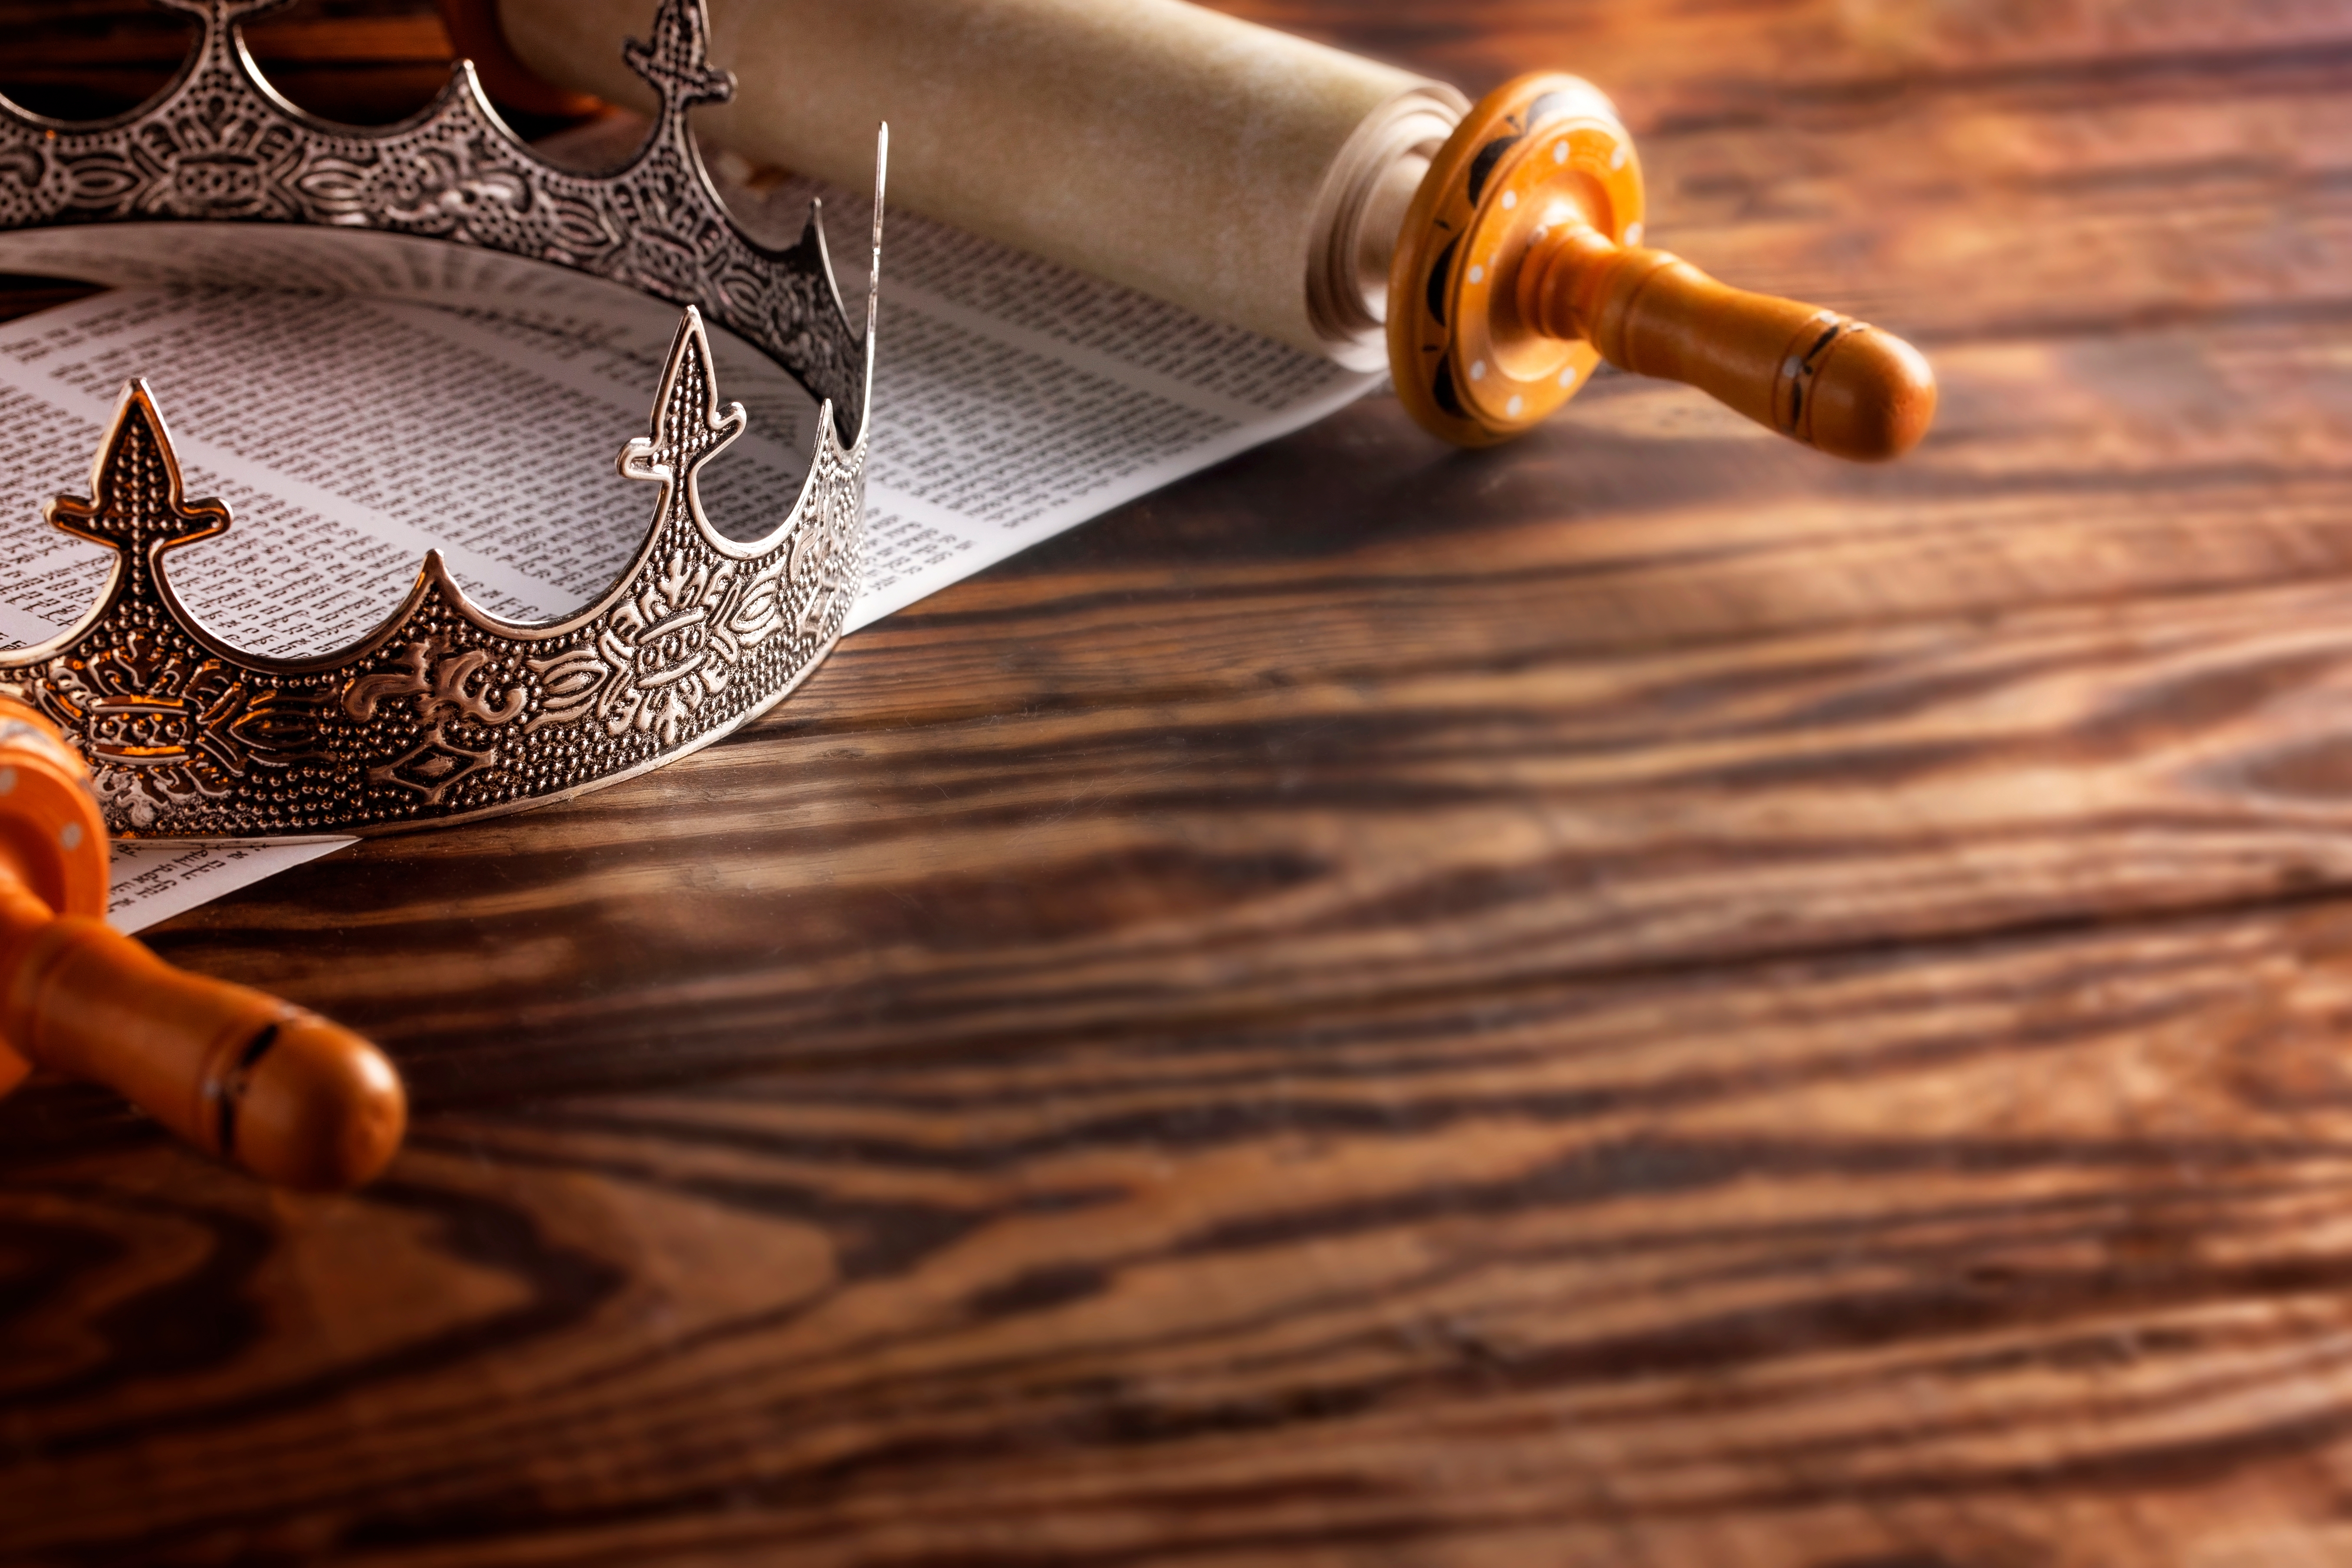 A King's crown and scroll lying on a table | Source: Shutterstock